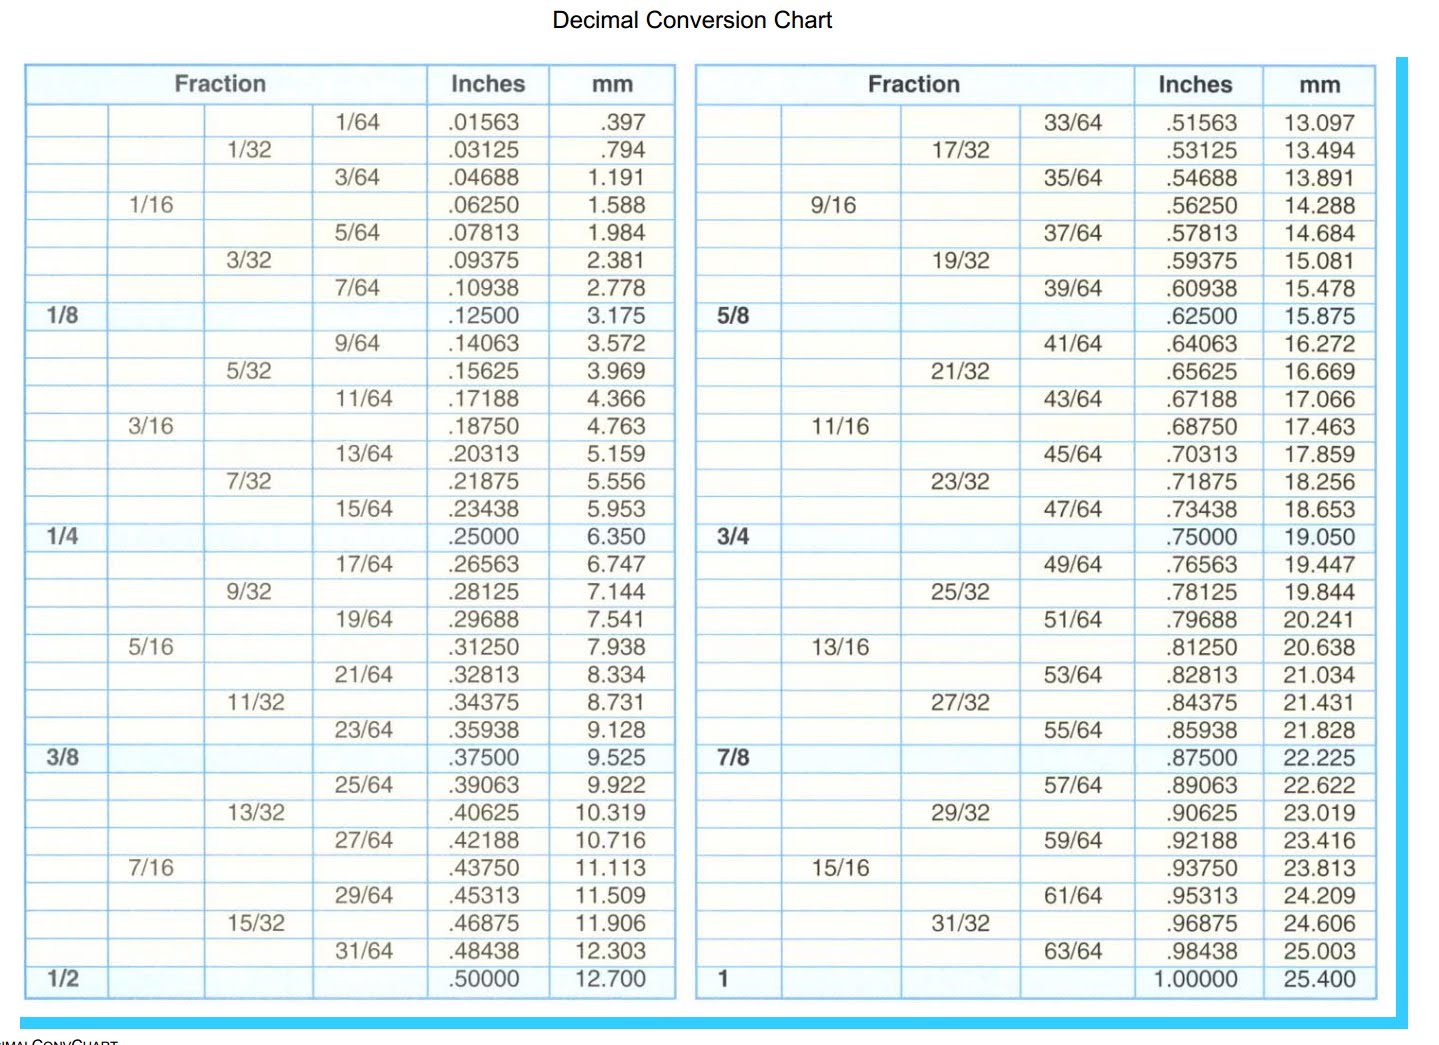 Convert Decimal To Inches Chart